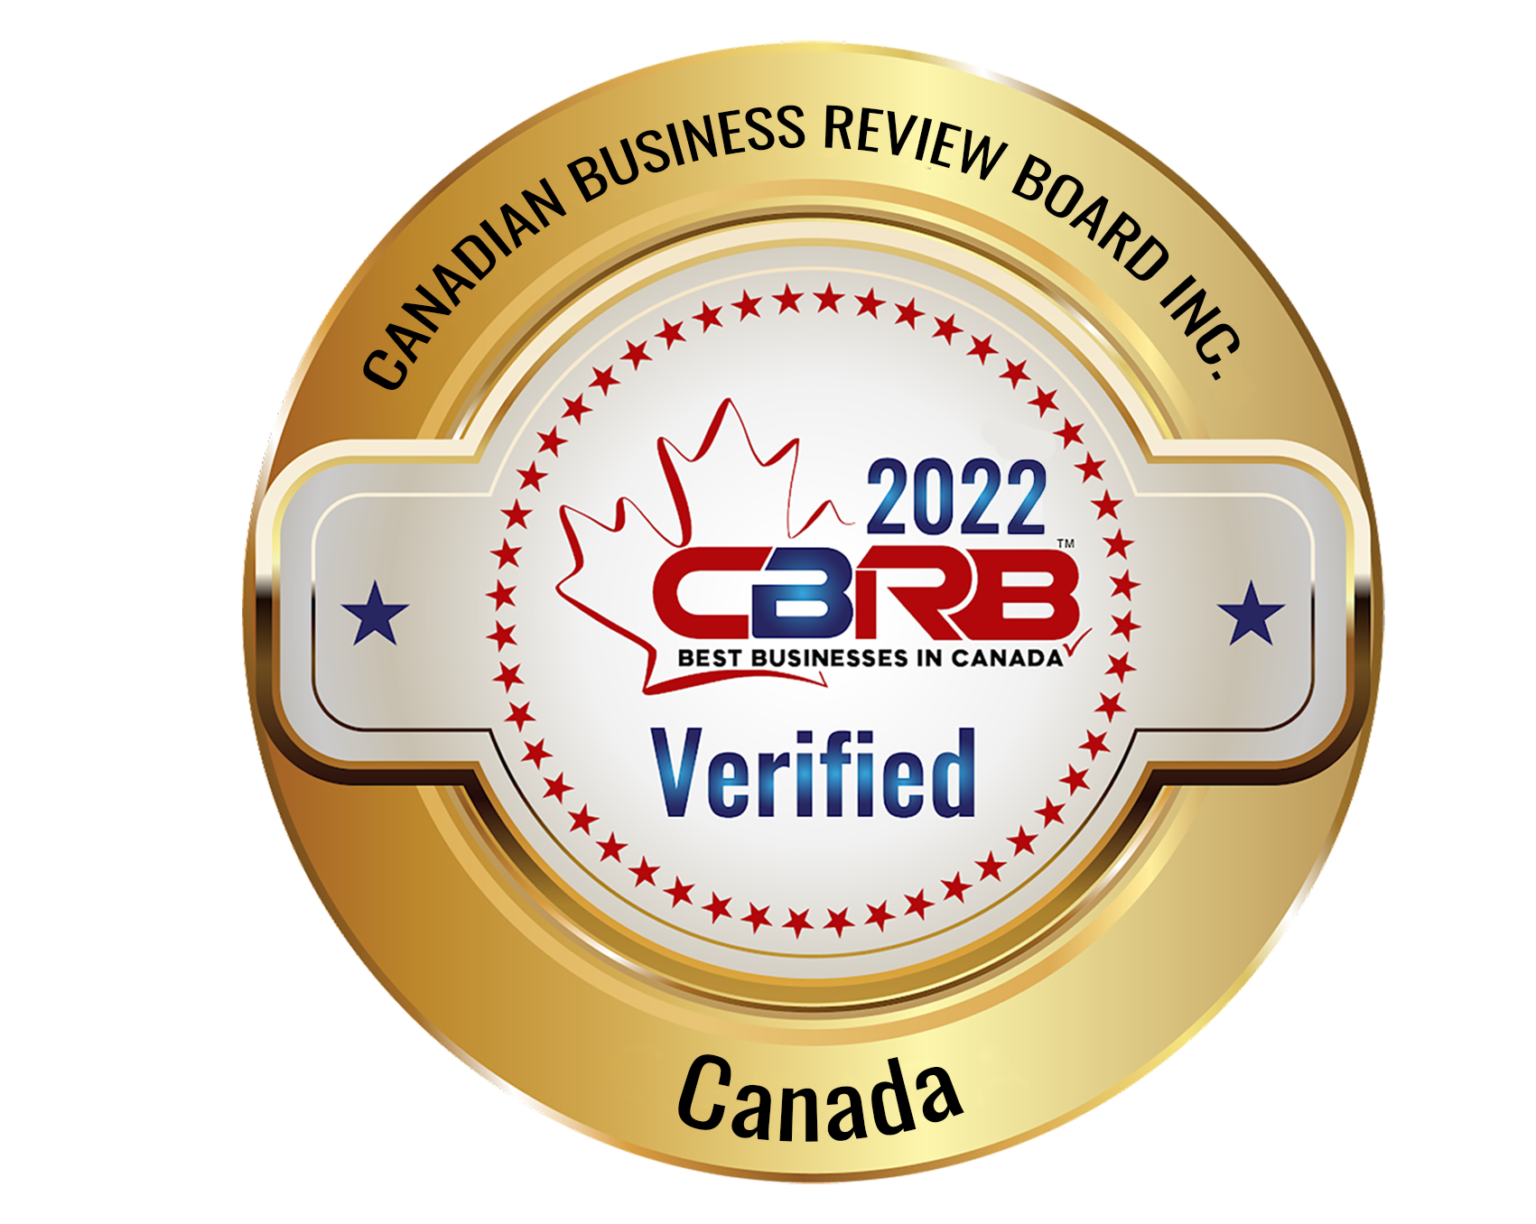 2022 Canadian Business Review Board Inc Logo